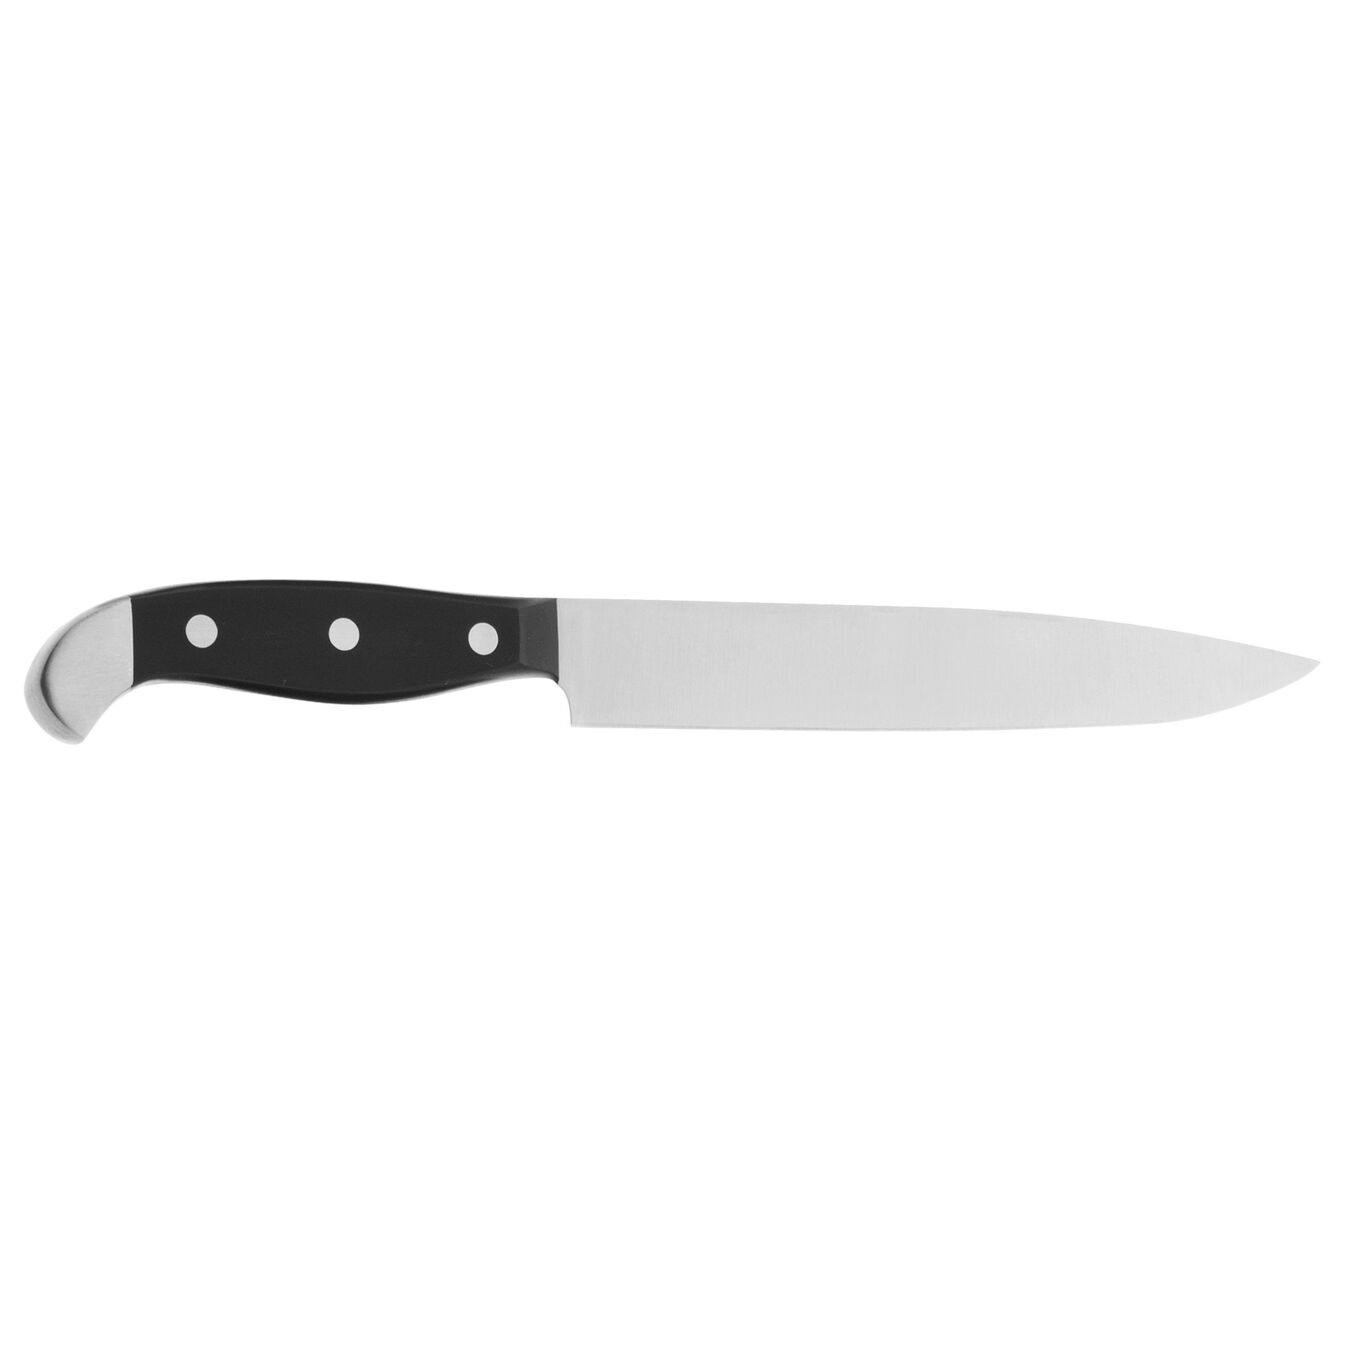 8-inch, Slicing/Carving Knife,,large 3